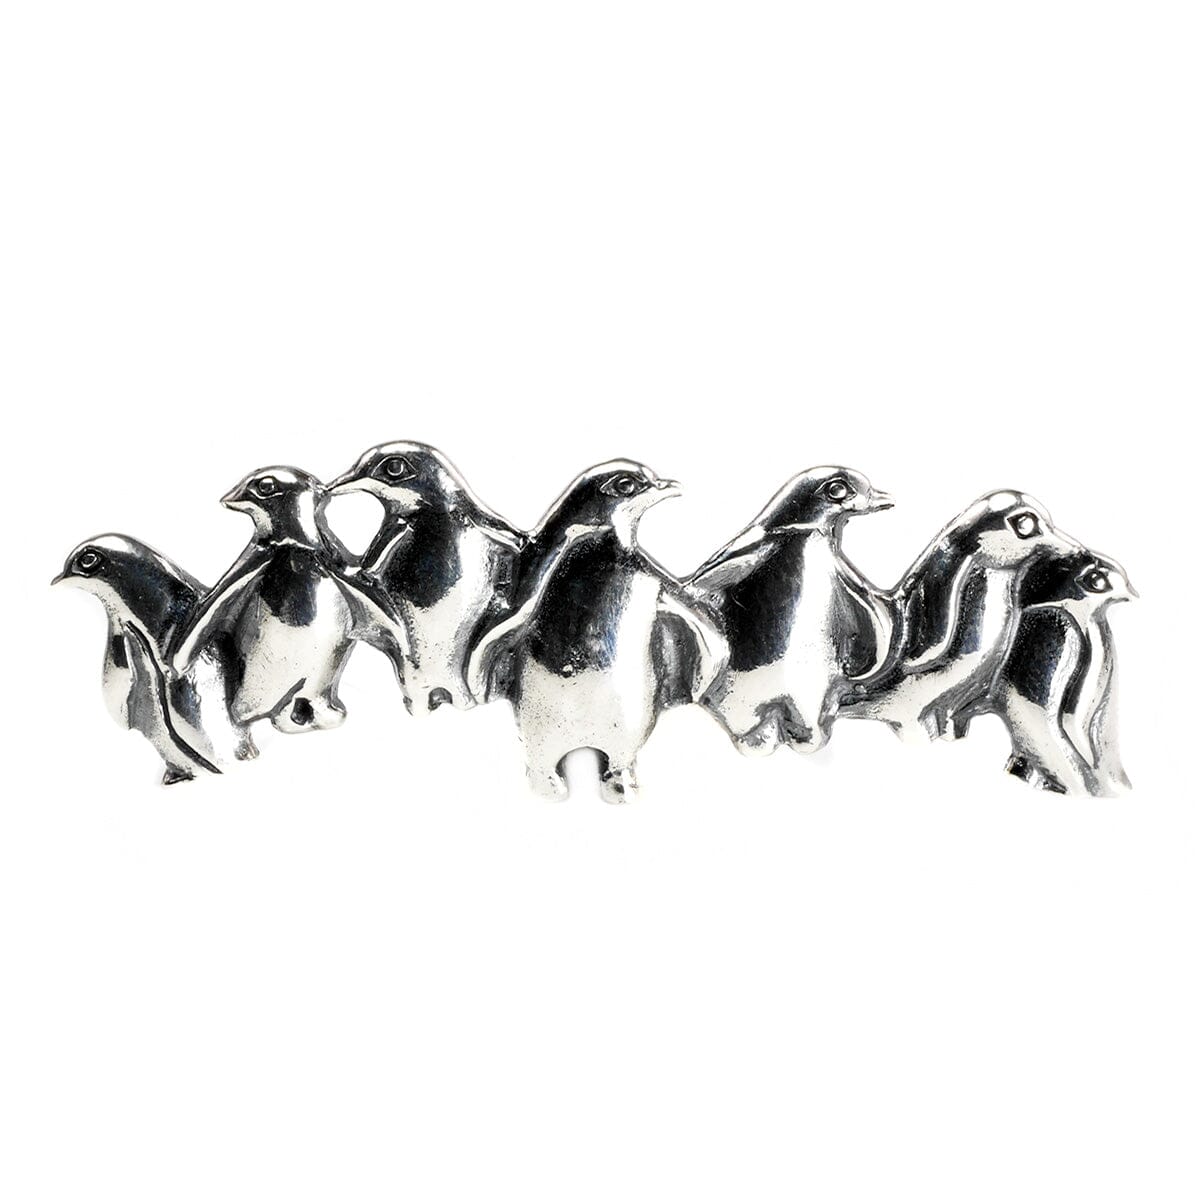 Great Lakes Boutique Silver Penguin Brooch